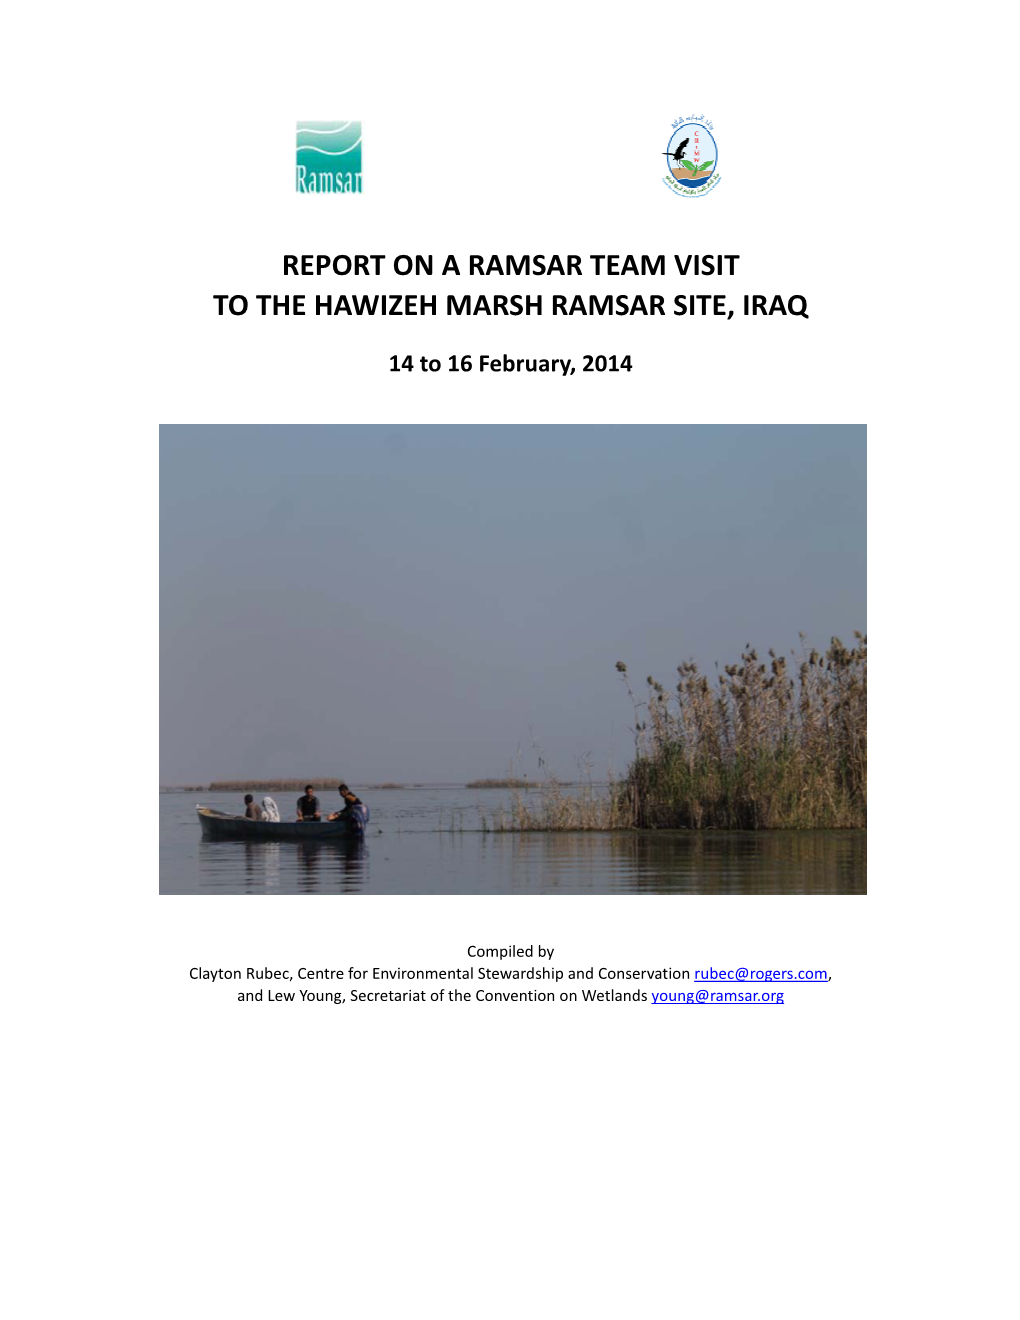 Report on a Ramsar Team Visit to the Hawizeh Marsh Ramsar Site, Iraq